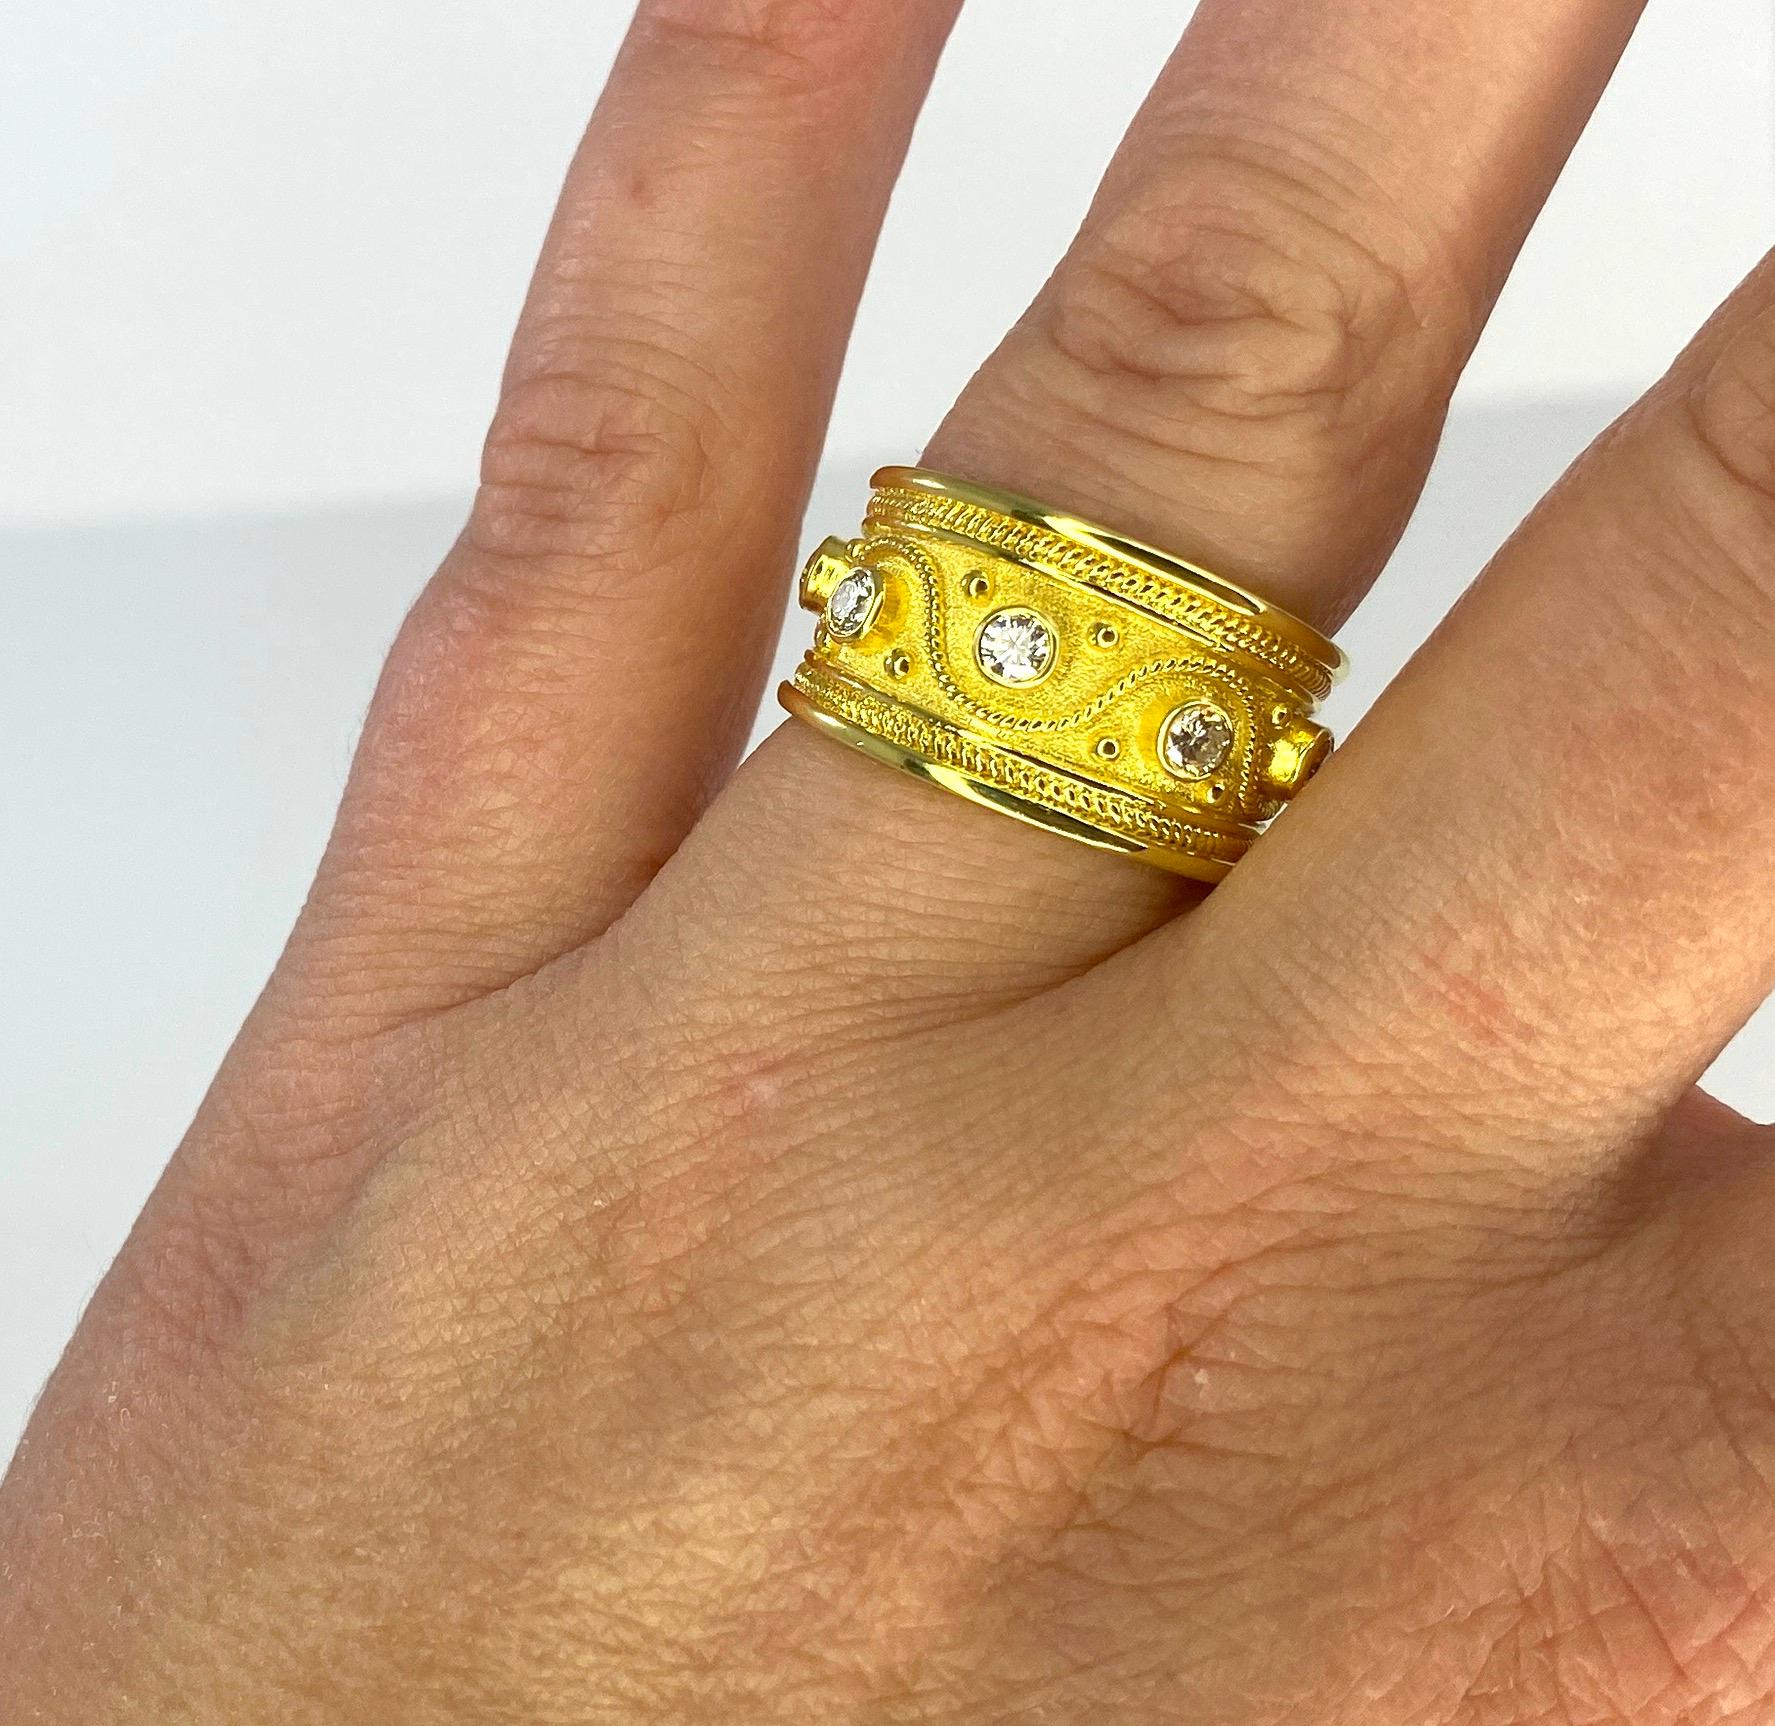 S.Georgios designer graduated ring handmade from solid 18 Karat Yellow Gold. The ring is microscopically decorated with 18 Karat yellow gold beads that are set separately and twisted wire that is invisibly connected and turns and twists all the way